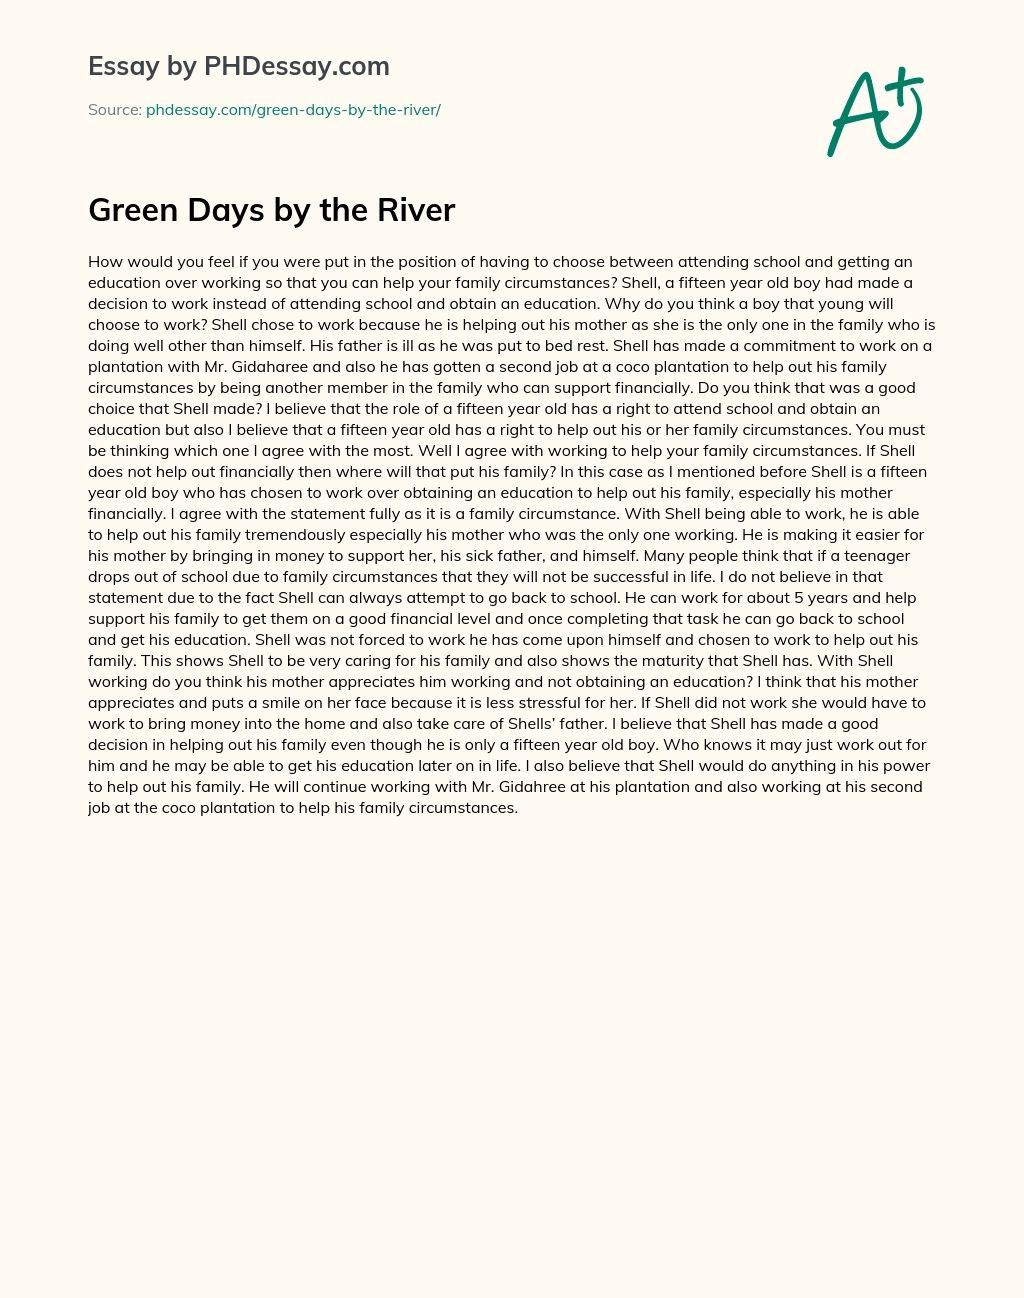 Green Days by the River essay